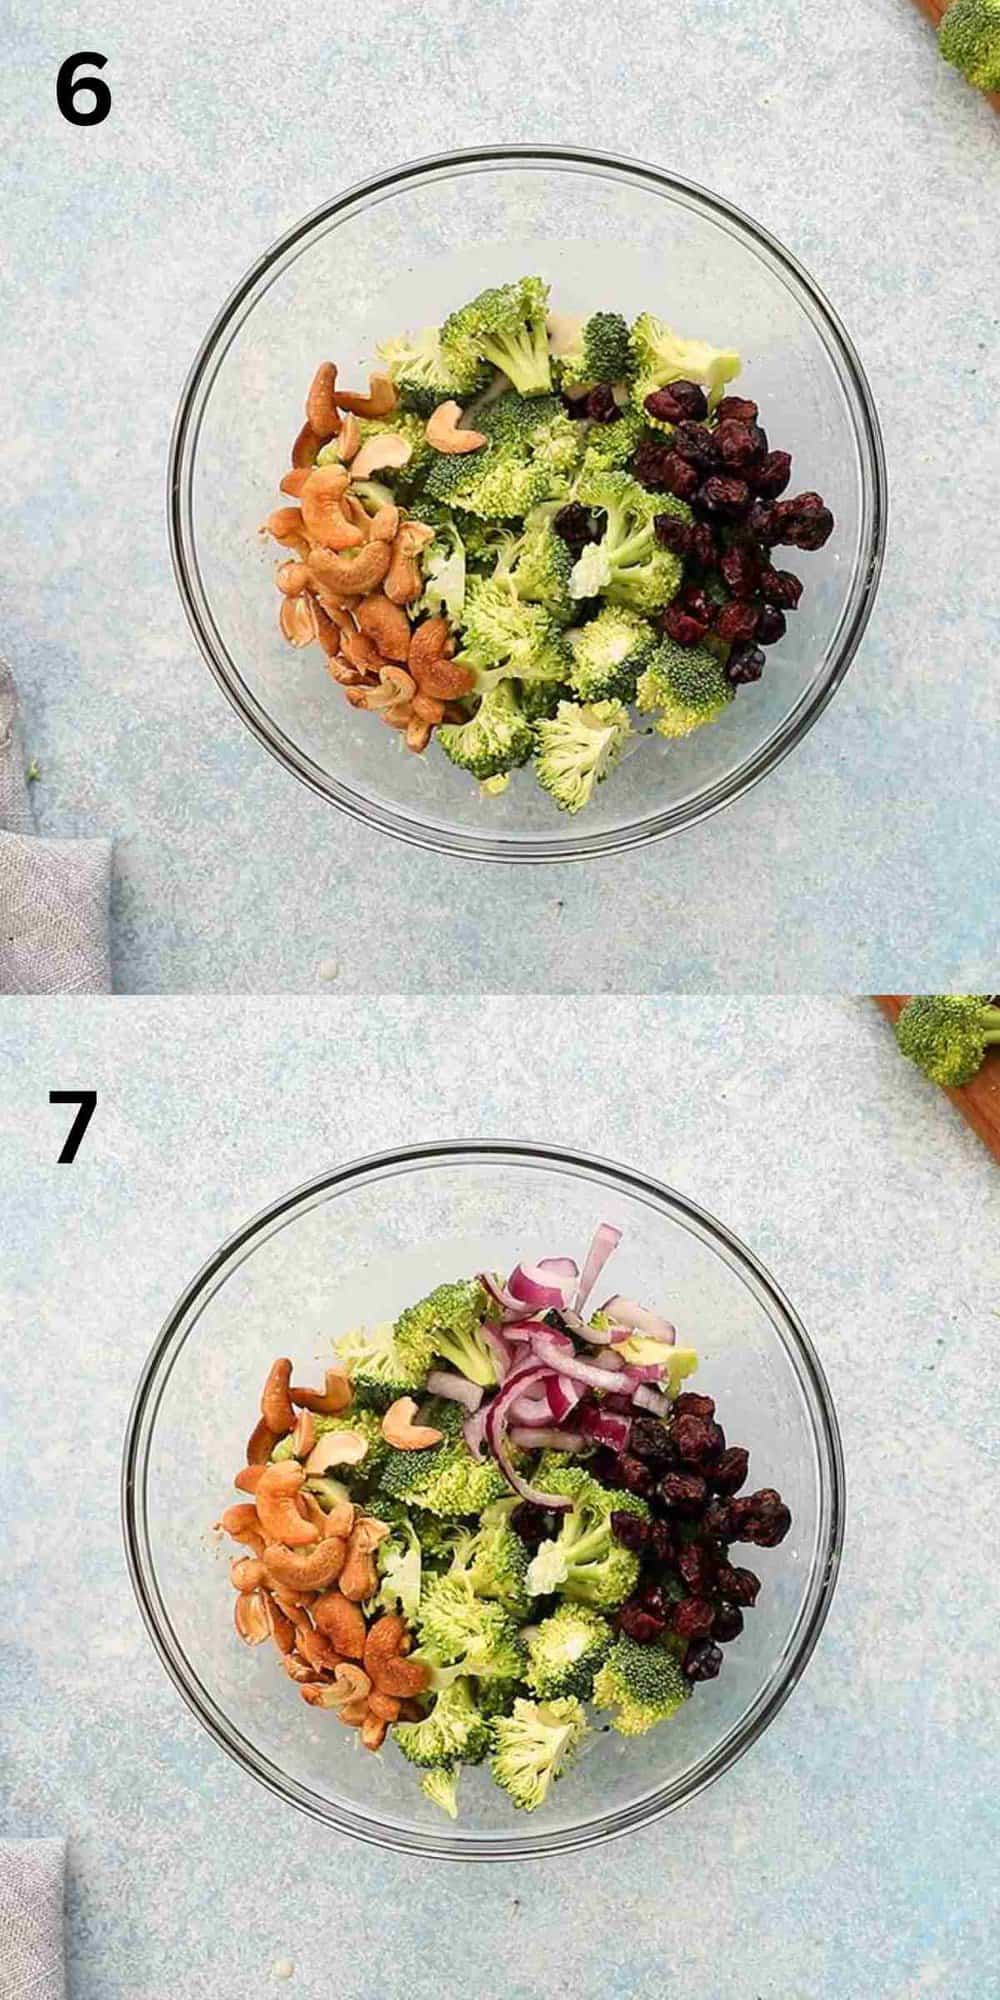 2 photo collage of a glass bowl with broccoli florets, roasted cashews, red onion and dried cranberries.